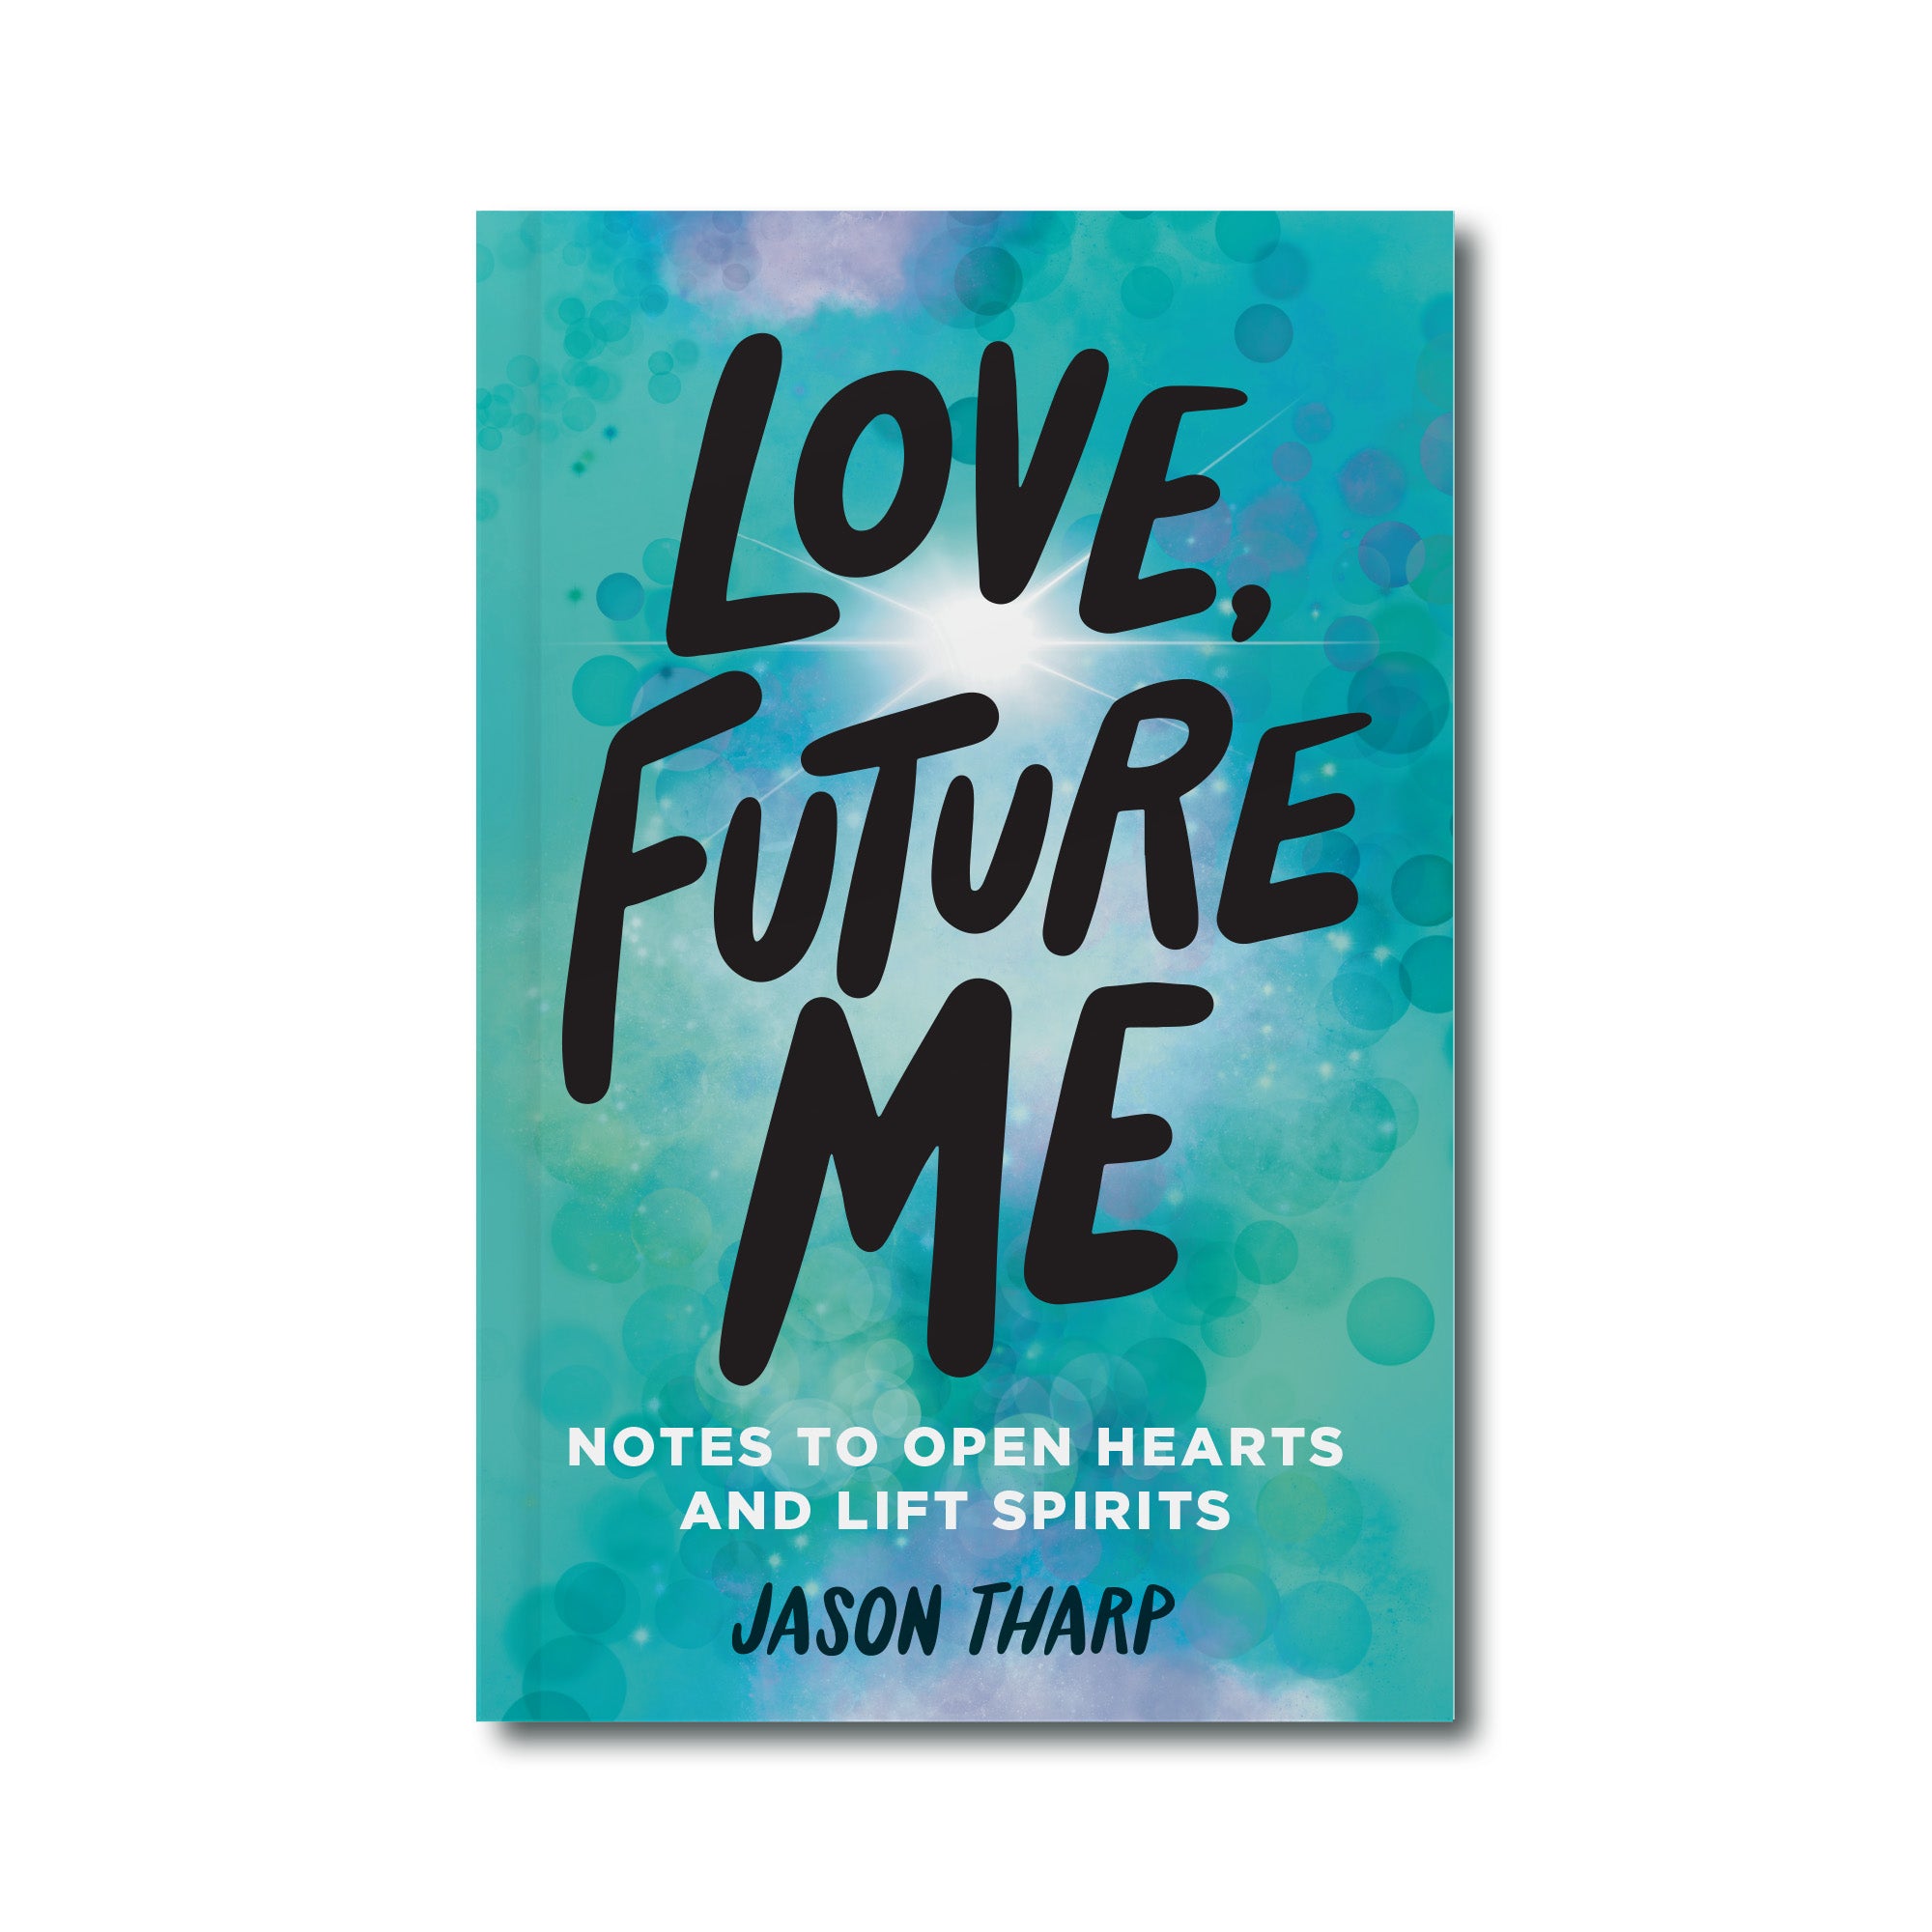 Love, Future Me. Notes To Open Hearts and Lift Spirits. By Jason Tharp